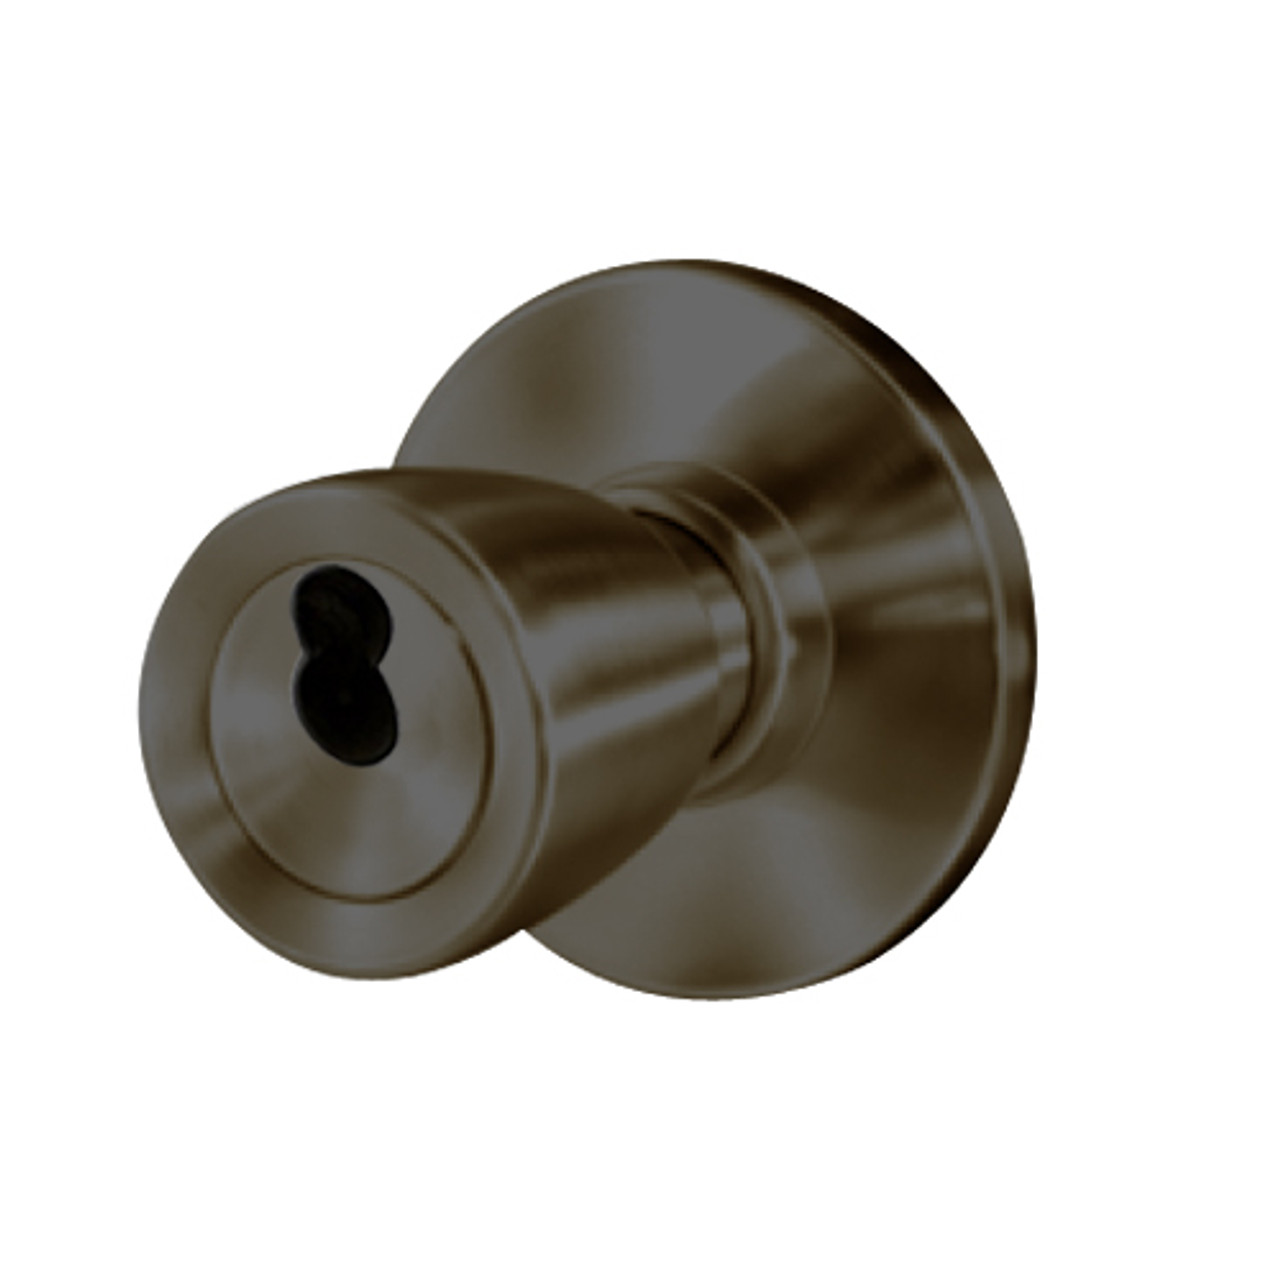 8K37A6ASTK613 Best 8K Series Dormitory/Storeroom Heavy Duty Cylindrical Knob Locks with Tulip Style in Oil Rubbed Bronze